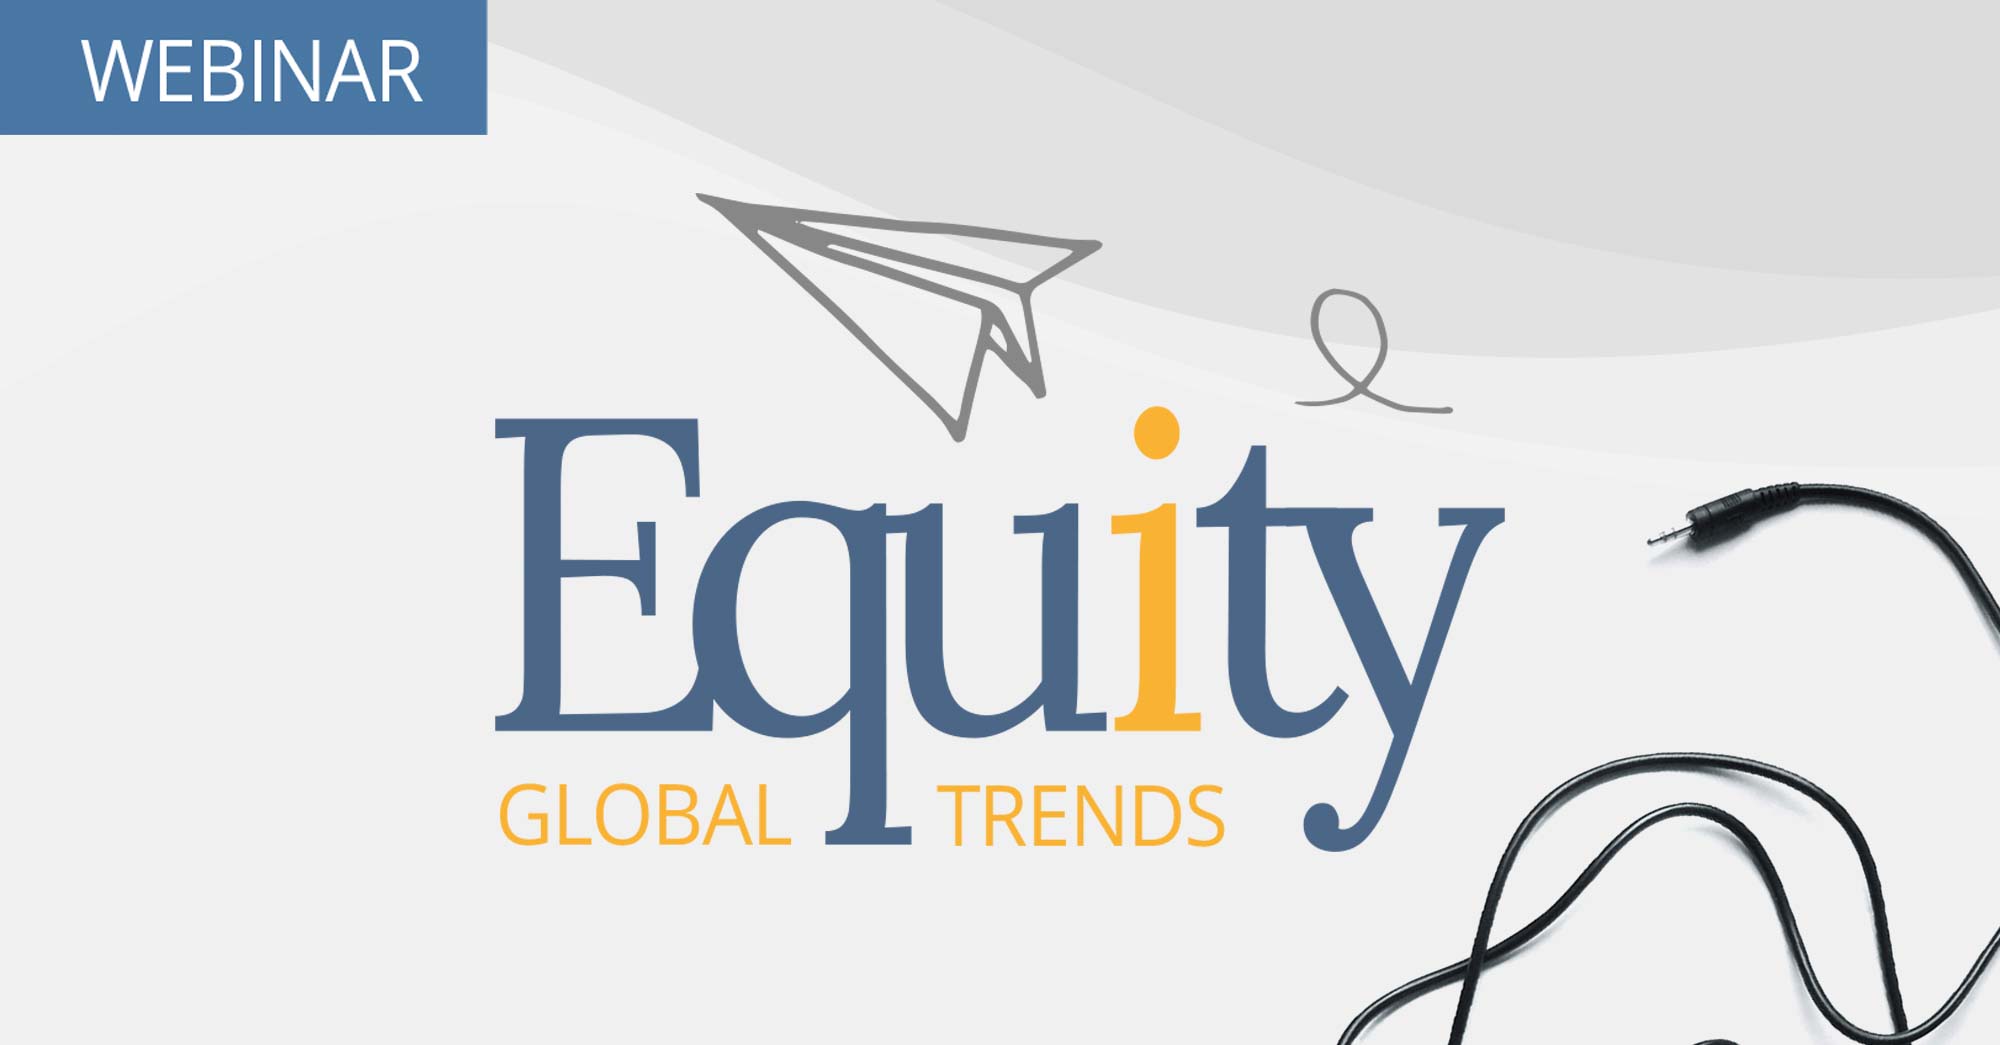 Webinar: Global Employee Equity Trends 2019 – How Should You Respond